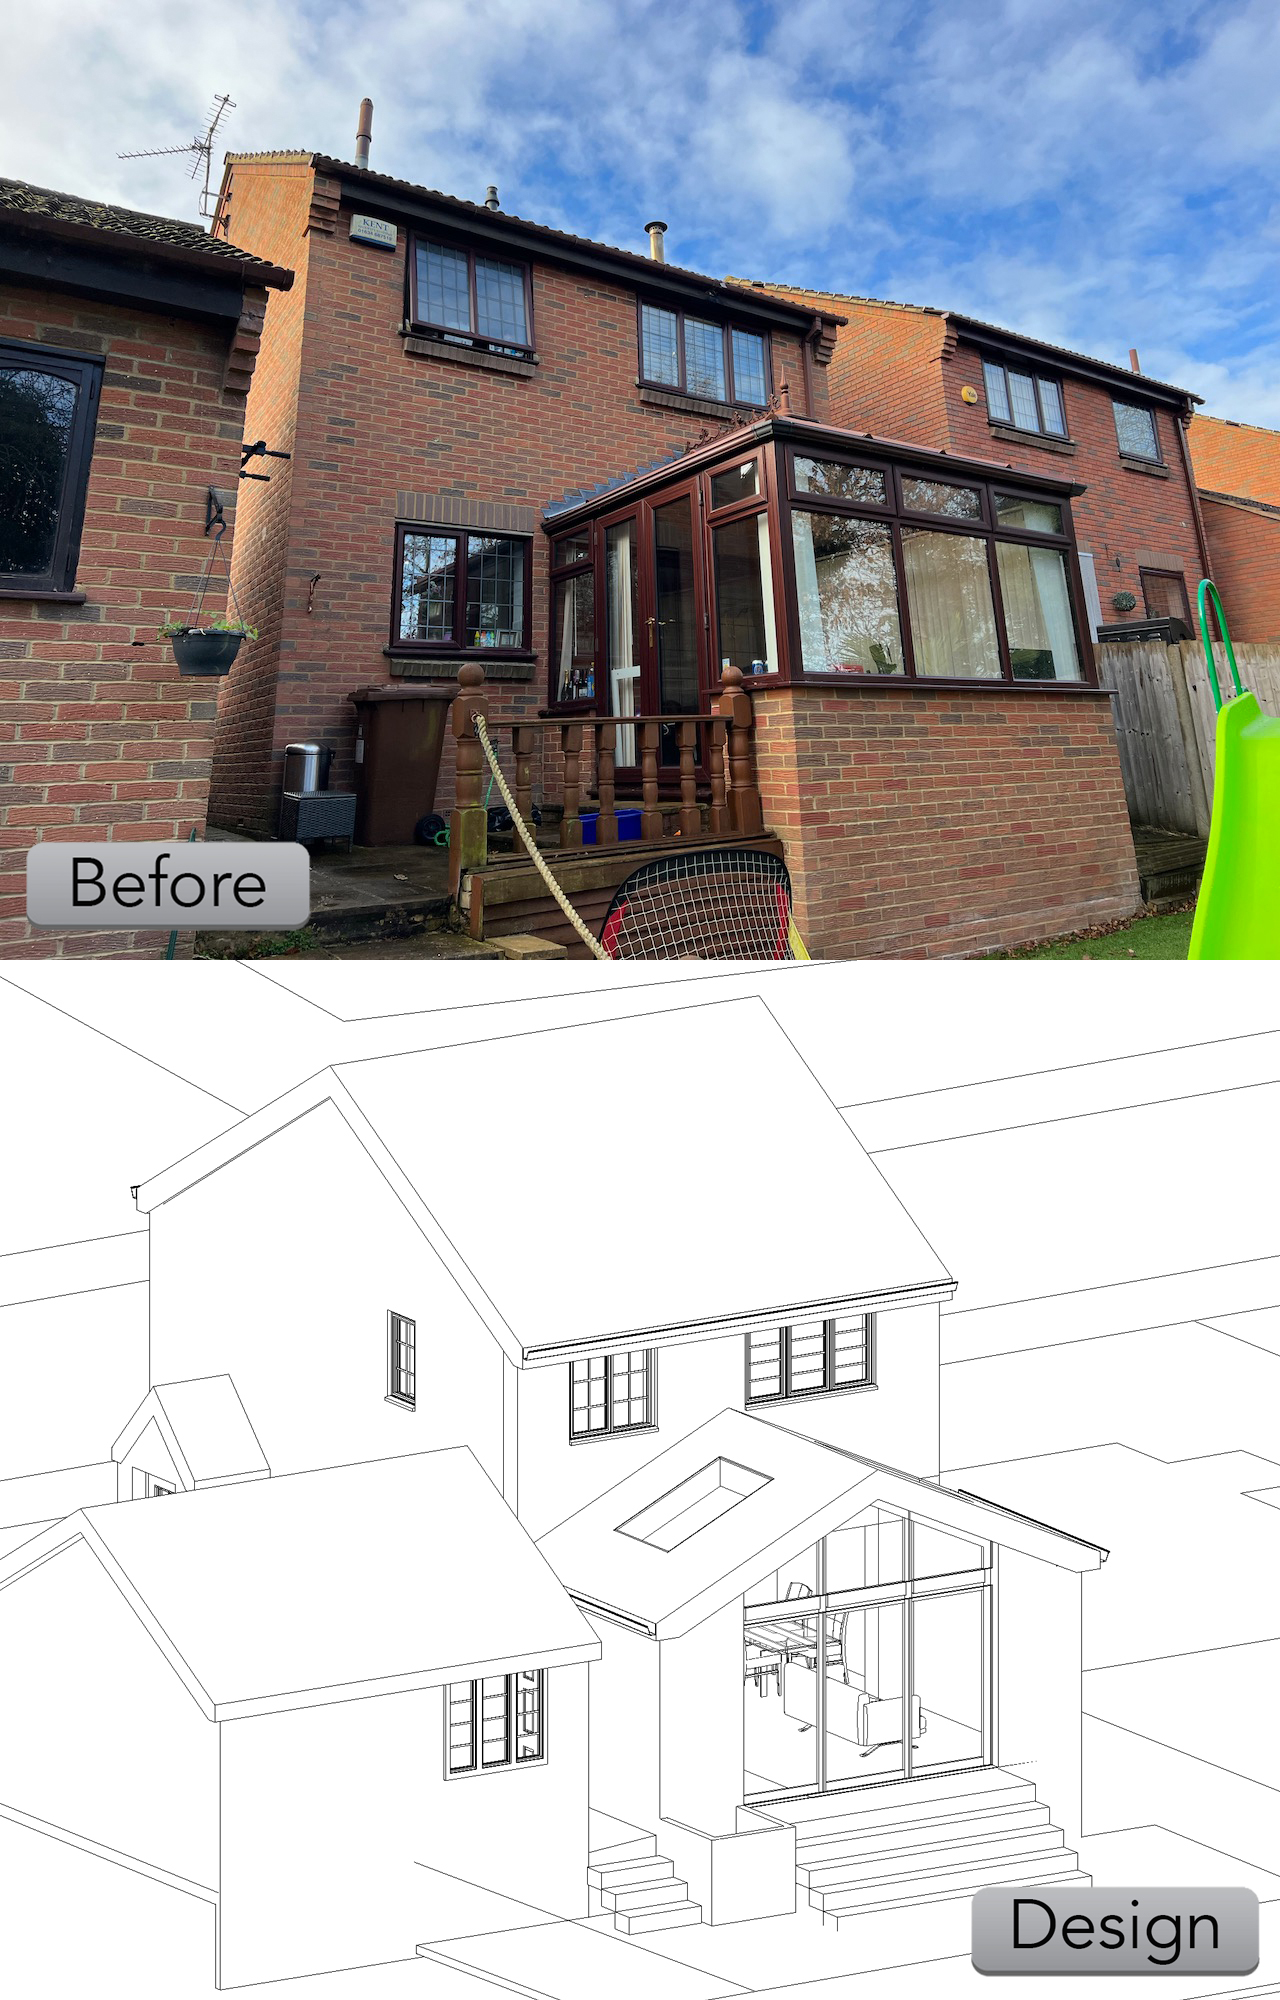 Before and After of a single storey rear extension to a detached house in Chatham, Medway, Kent